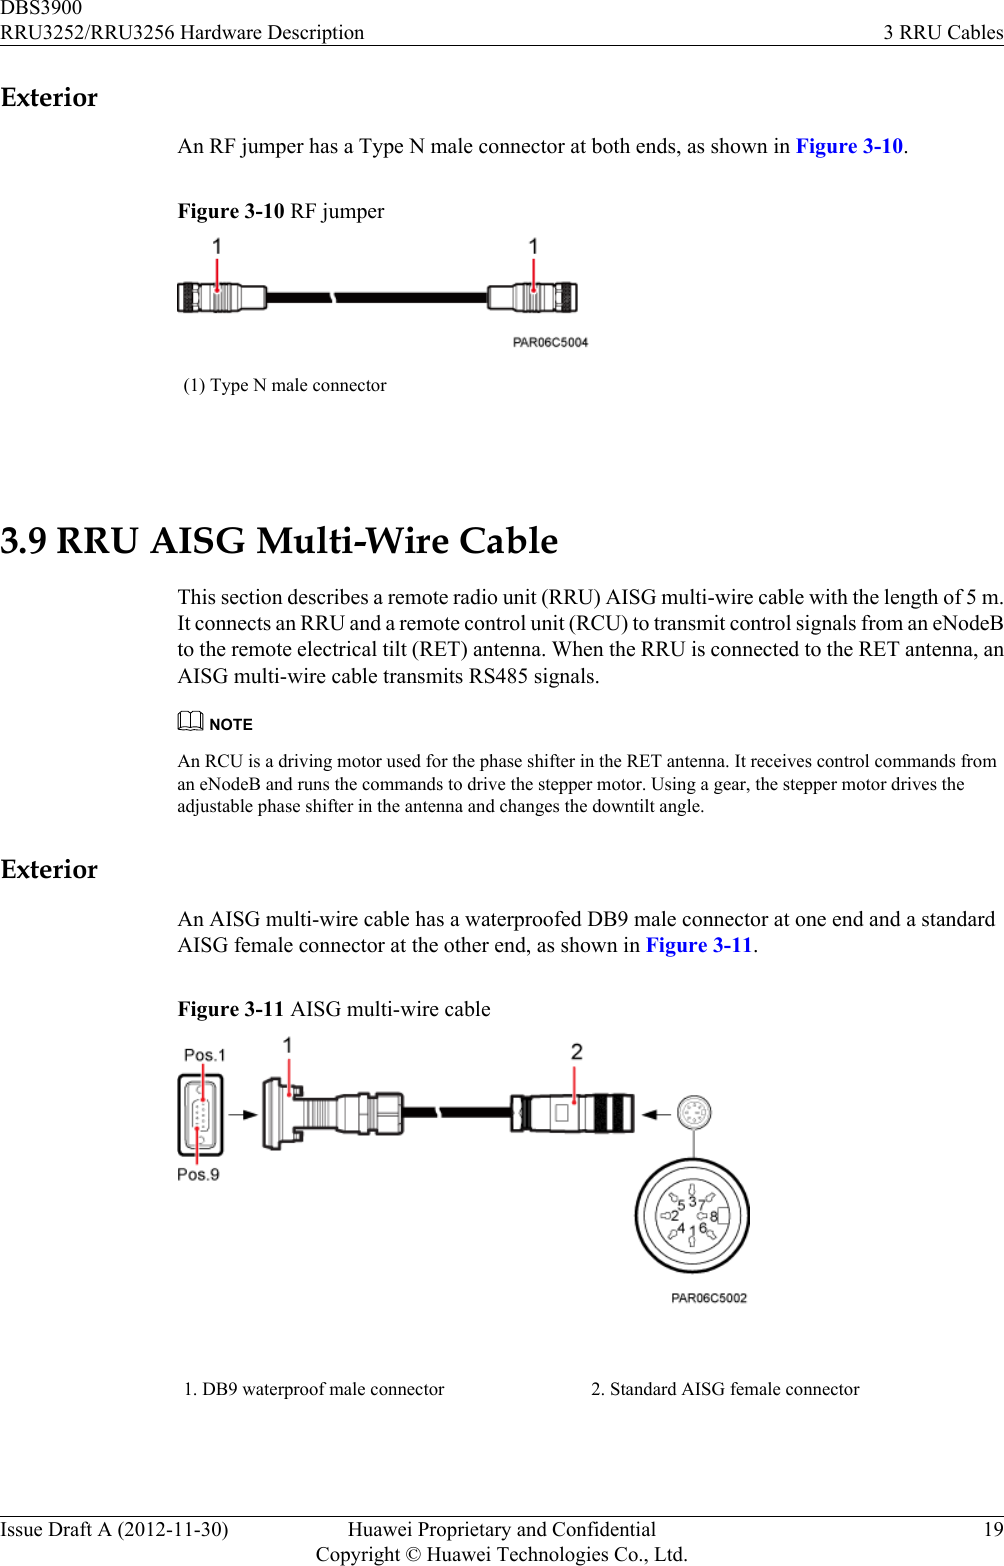 ExteriorAn RF jumper has a Type N male connector at both ends, as shown in Figure 3-10.Figure 3-10 RF jumper(1) Type N male connector 3.9 RRU AISG Multi-Wire CableThis section describes a remote radio unit (RRU) AISG multi-wire cable with the length of 5 m.It connects an RRU and a remote control unit (RCU) to transmit control signals from an eNodeBto the remote electrical tilt (RET) antenna. When the RRU is connected to the RET antenna, anAISG multi-wire cable transmits RS485 signals.NOTEAn RCU is a driving motor used for the phase shifter in the RET antenna. It receives control commands froman eNodeB and runs the commands to drive the stepper motor. Using a gear, the stepper motor drives theadjustable phase shifter in the antenna and changes the downtilt angle.ExteriorAn AISG multi-wire cable has a waterproofed DB9 male connector at one end and a standardAISG female connector at the other end, as shown in Figure 3-11.Figure 3-11 AISG multi-wire cable1. DB9 waterproof male connector 2. Standard AISG female connector DBS3900RRU3252/RRU3256 Hardware Description 3 RRU CablesIssue Draft A (2012-11-30) Huawei Proprietary and ConfidentialCopyright © Huawei Technologies Co., Ltd.19